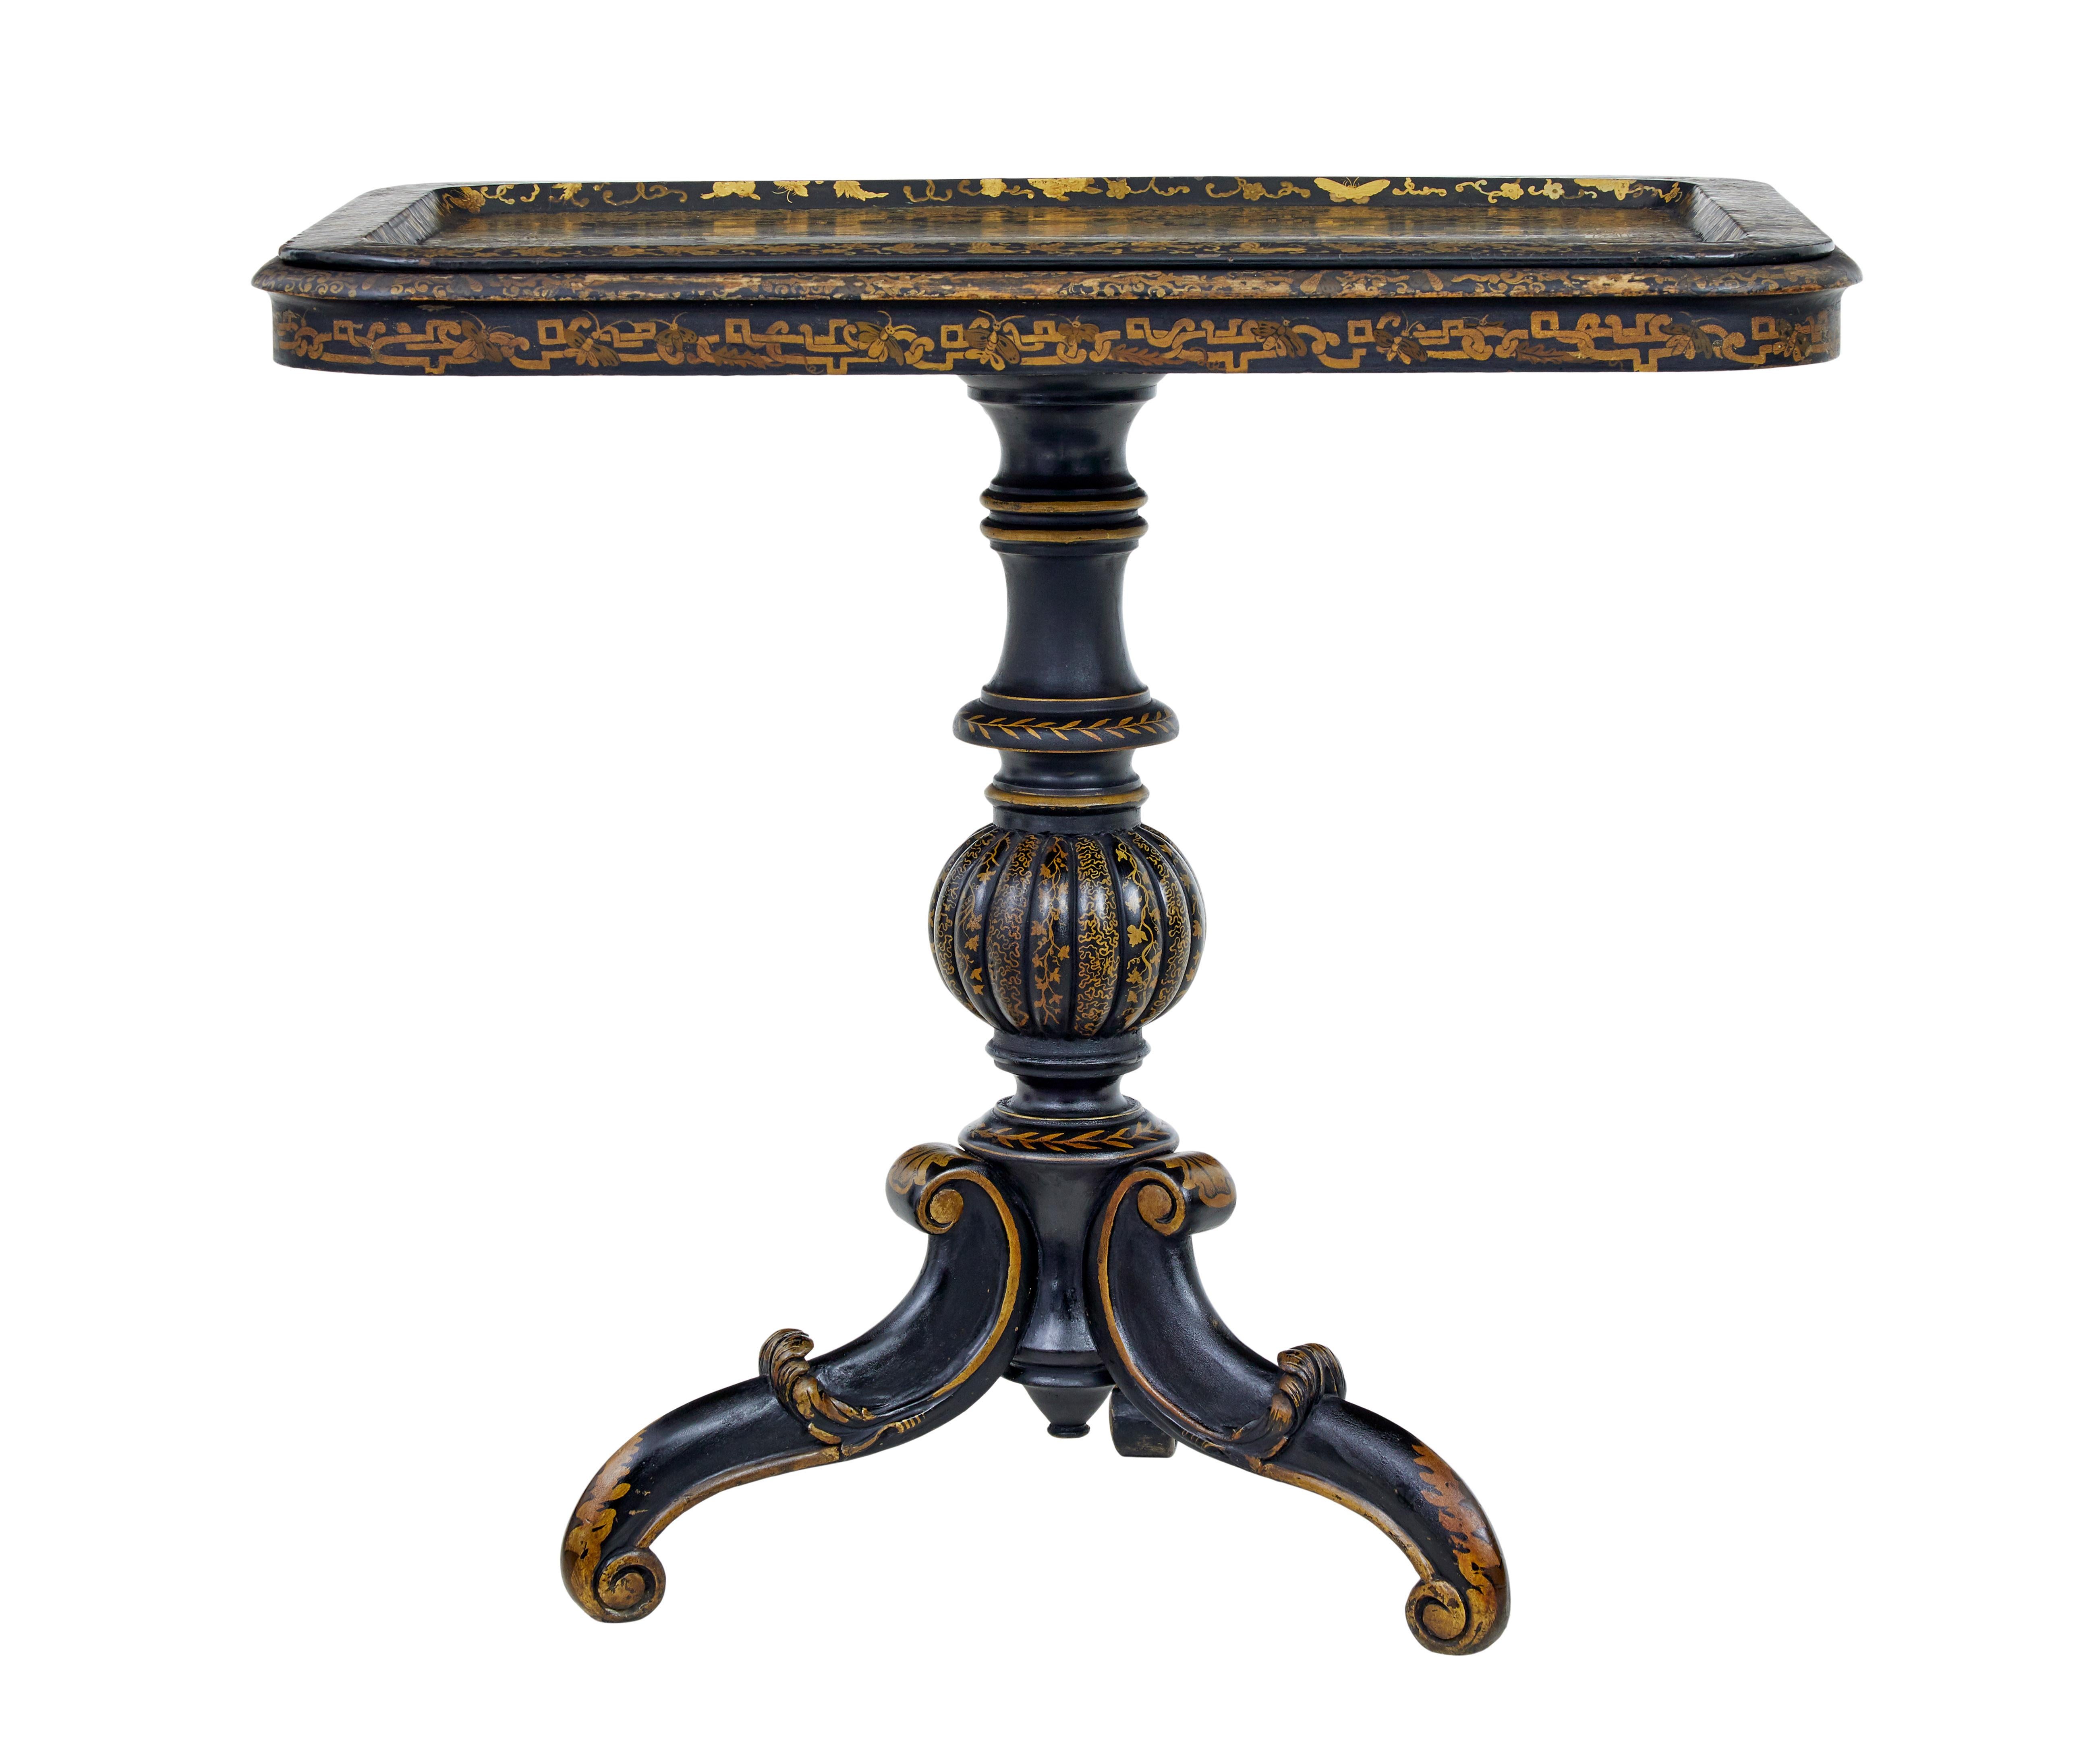 19th century Chinese black lacquered tray table circa 1880.

Beautifully hand painted and decorated tray table.  Black lacquered base colour, profusely painted in gold leaf, depicting scenes of a traditional Chinese social gathering, with